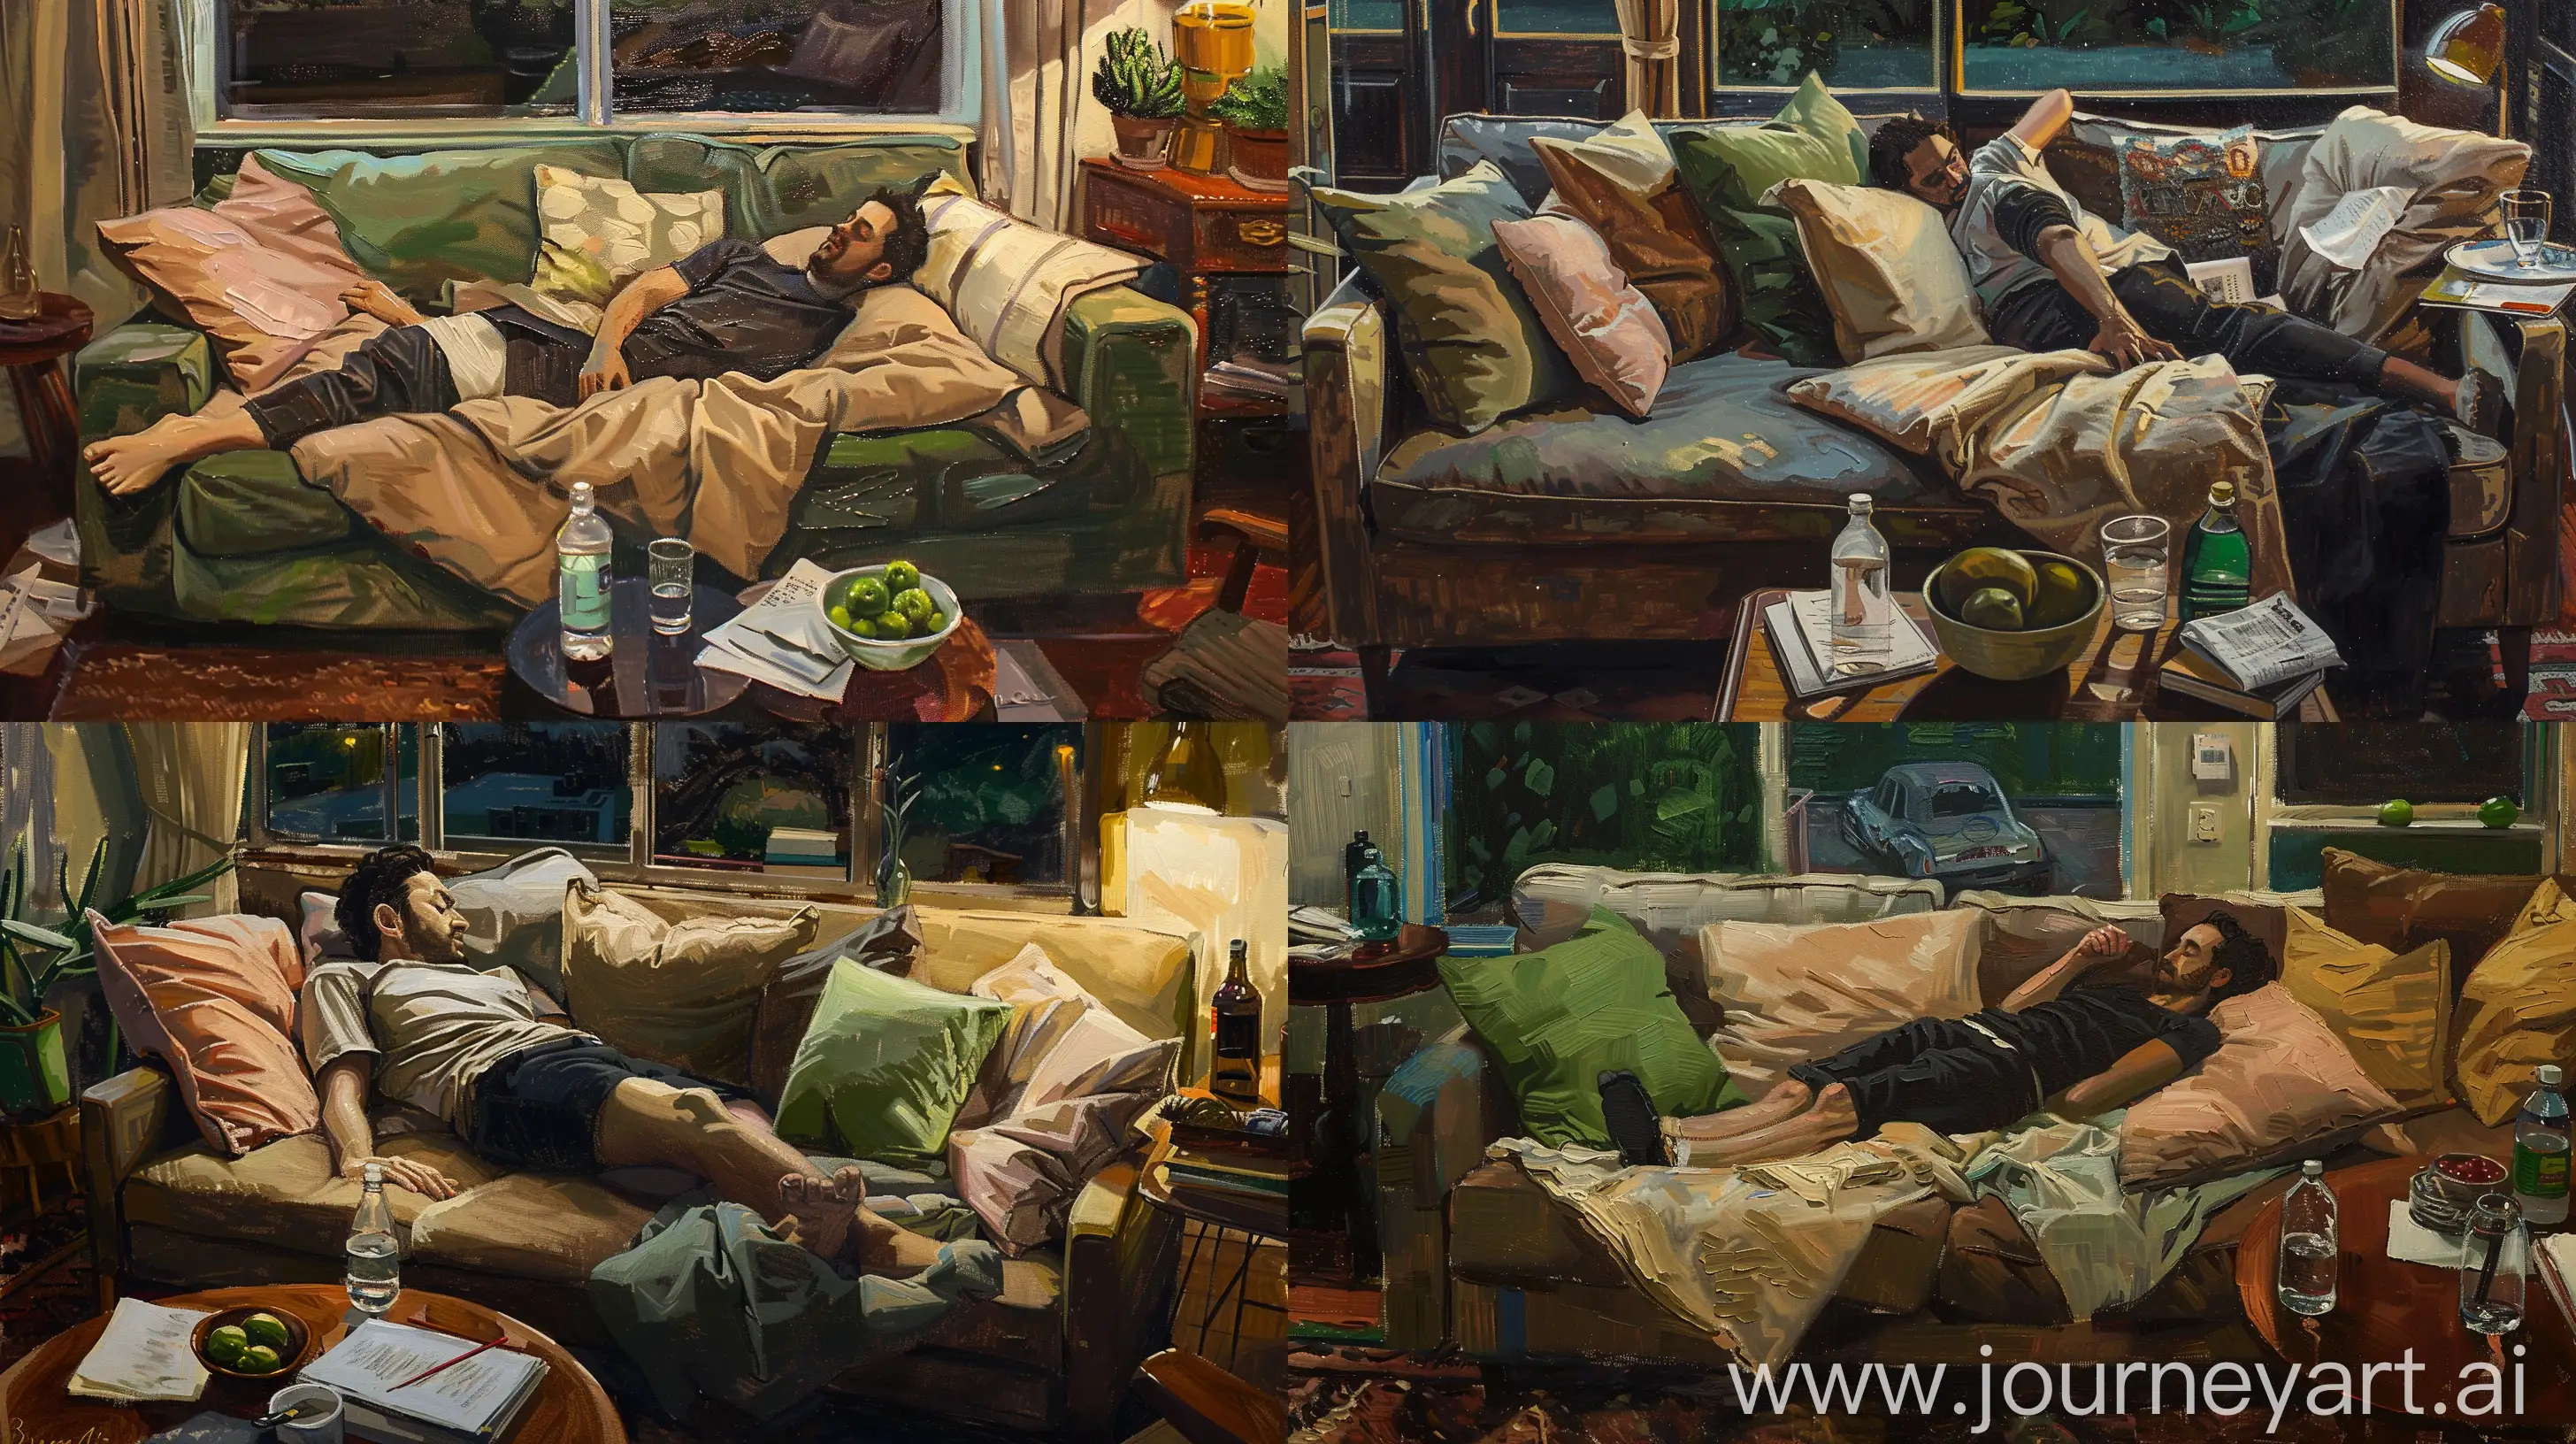 Cozy-Nighttime-Scene-Person-Relaxing-on-Couch-with-Earthy-Tones-and-Natural-Elements